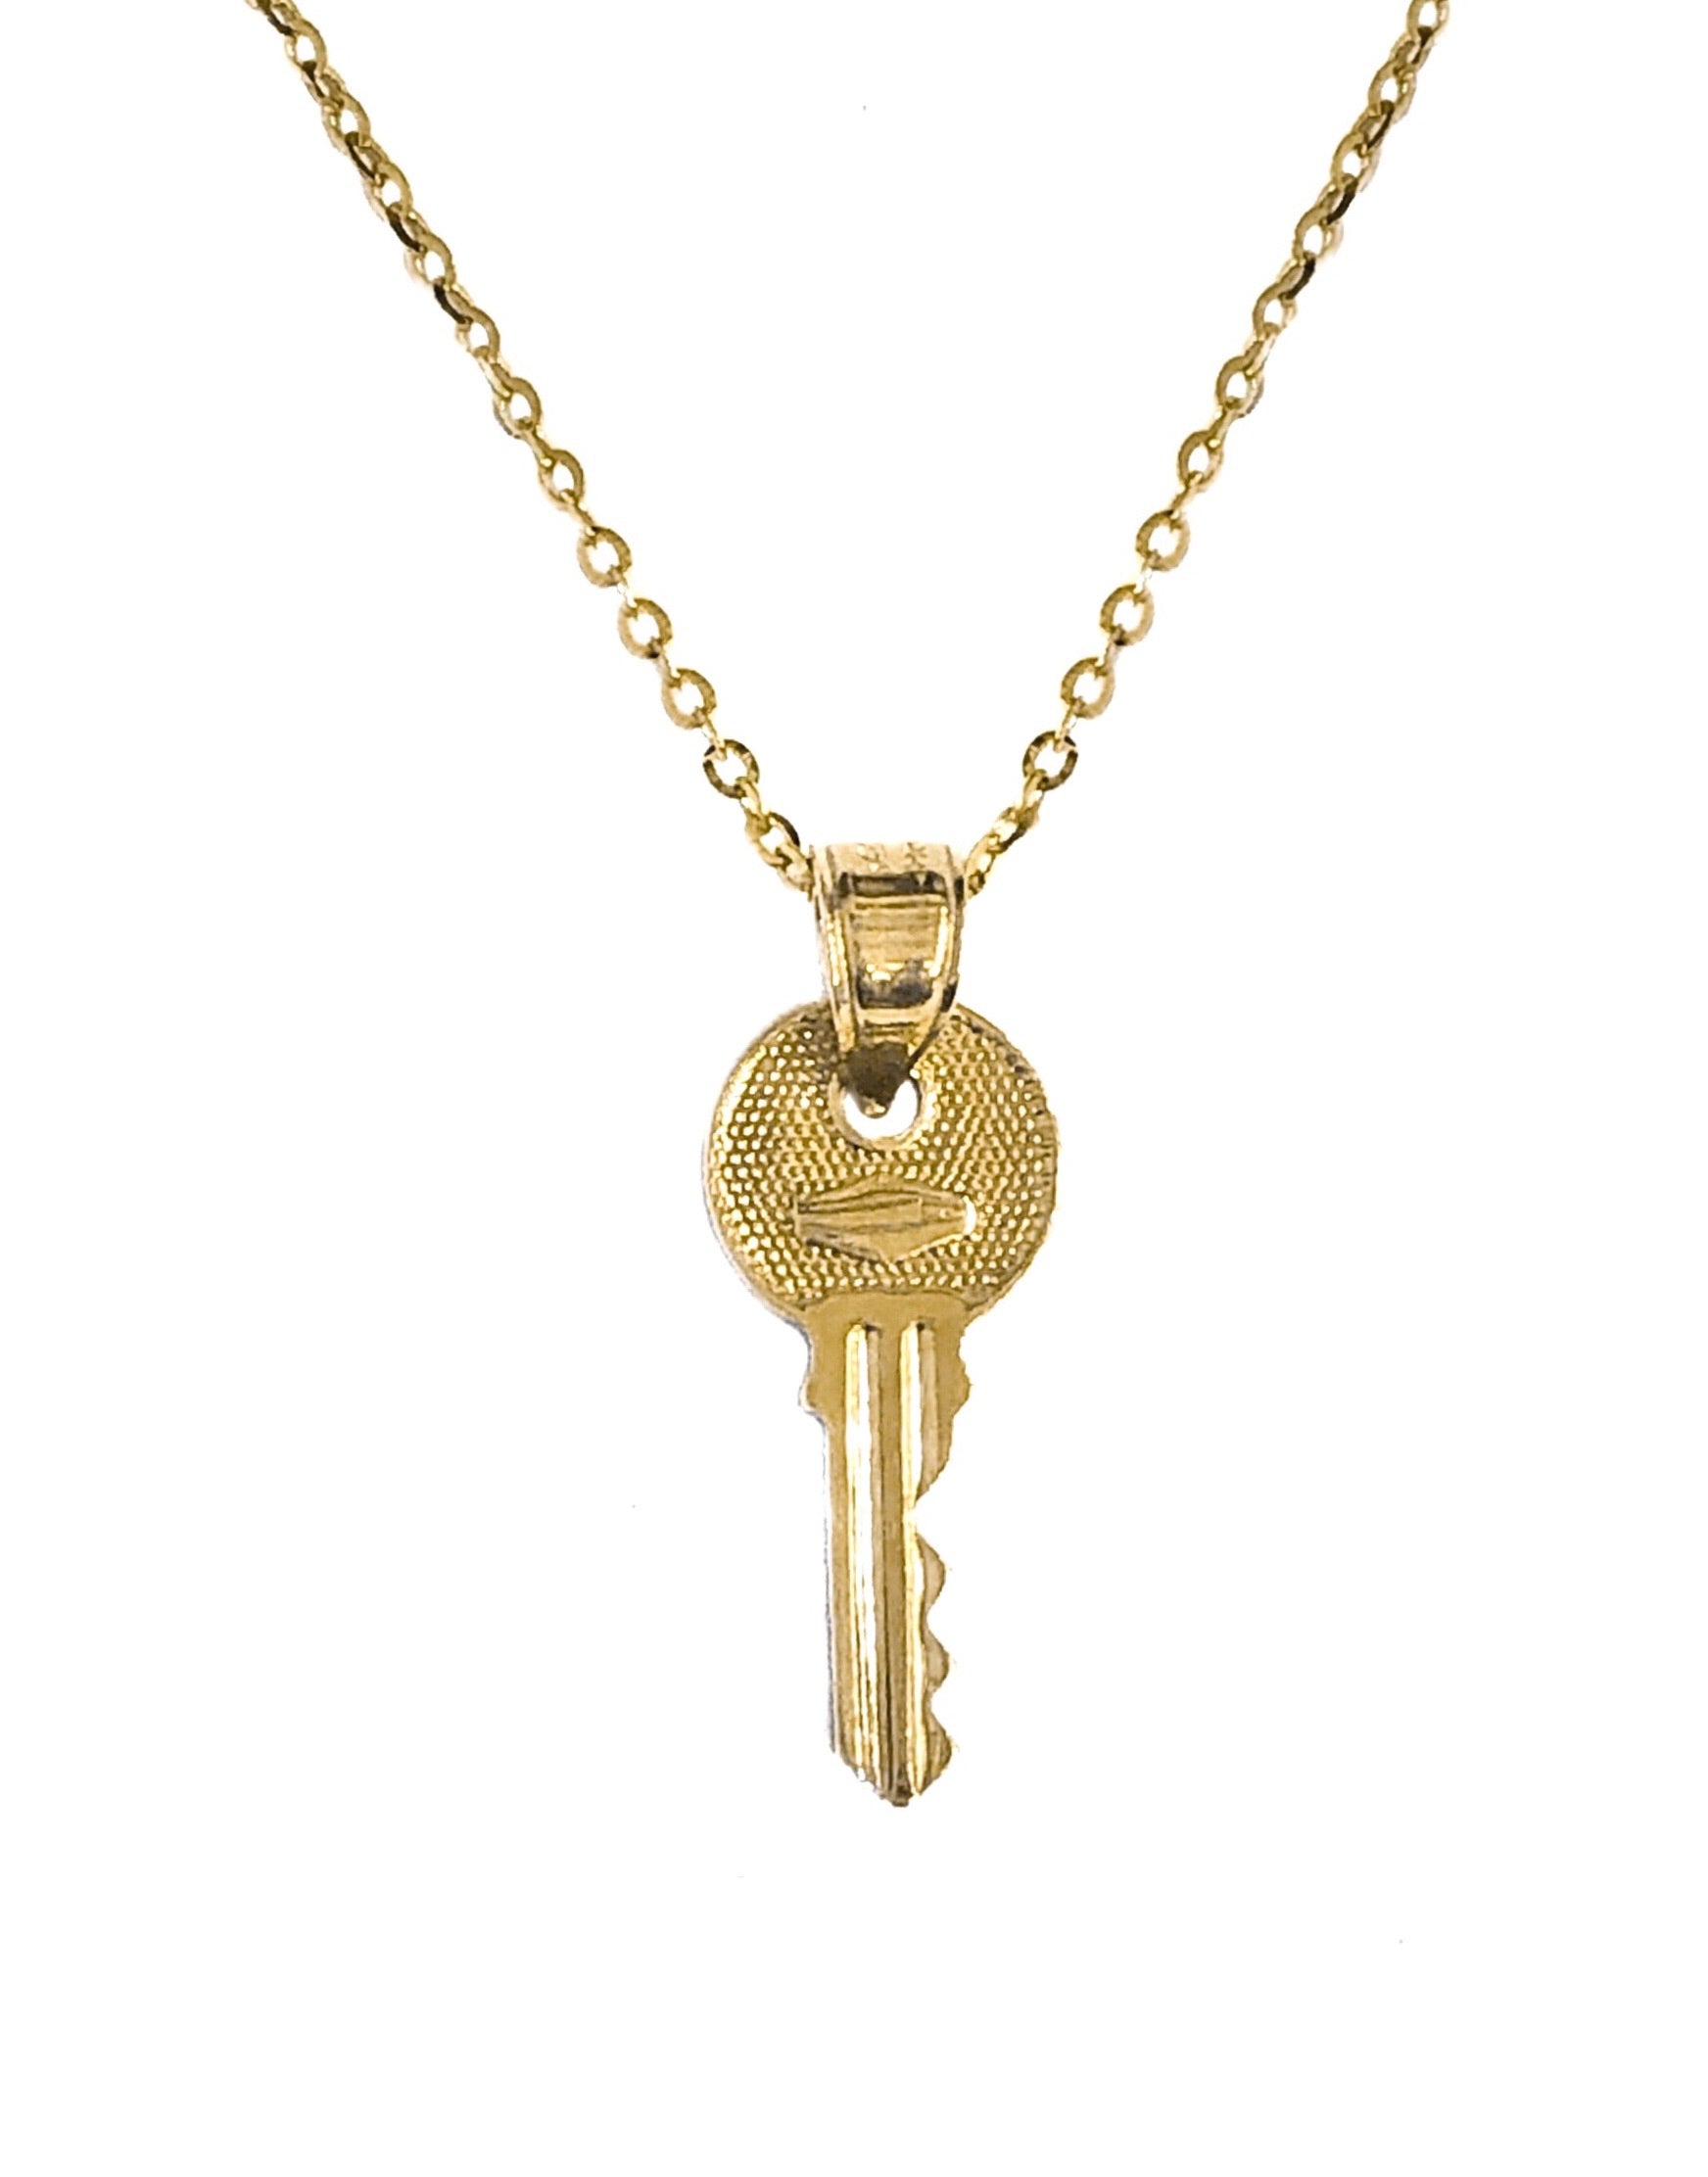 14K YELLOW GOLD THE KEY NECKLACE